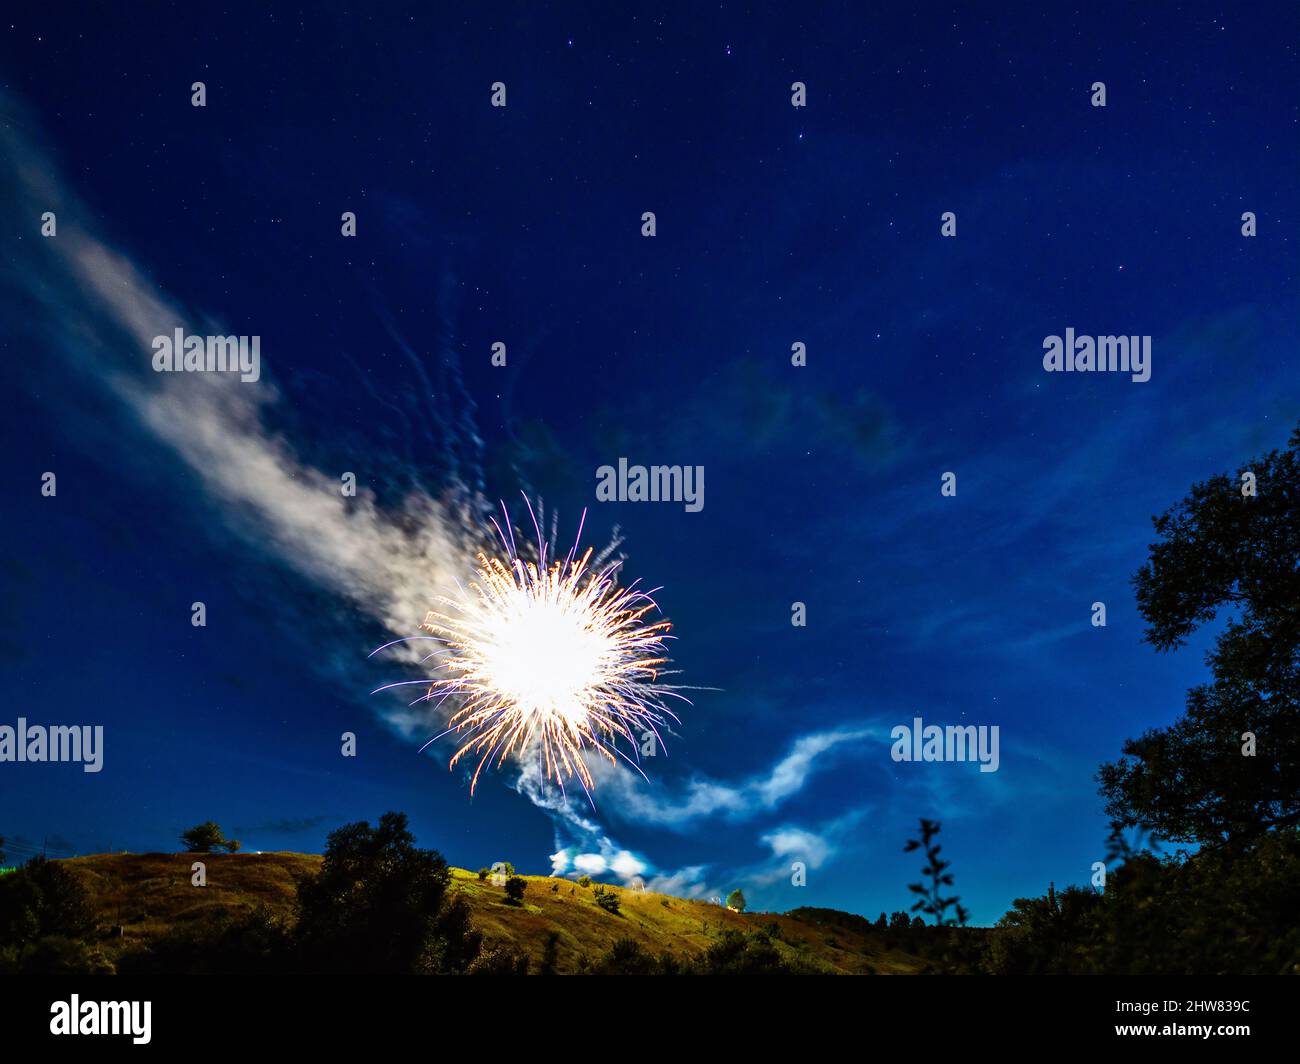 Bright fireworks over a hill in a natural landscape at night against a starry sky, a rural holiday landscape Stock Photo